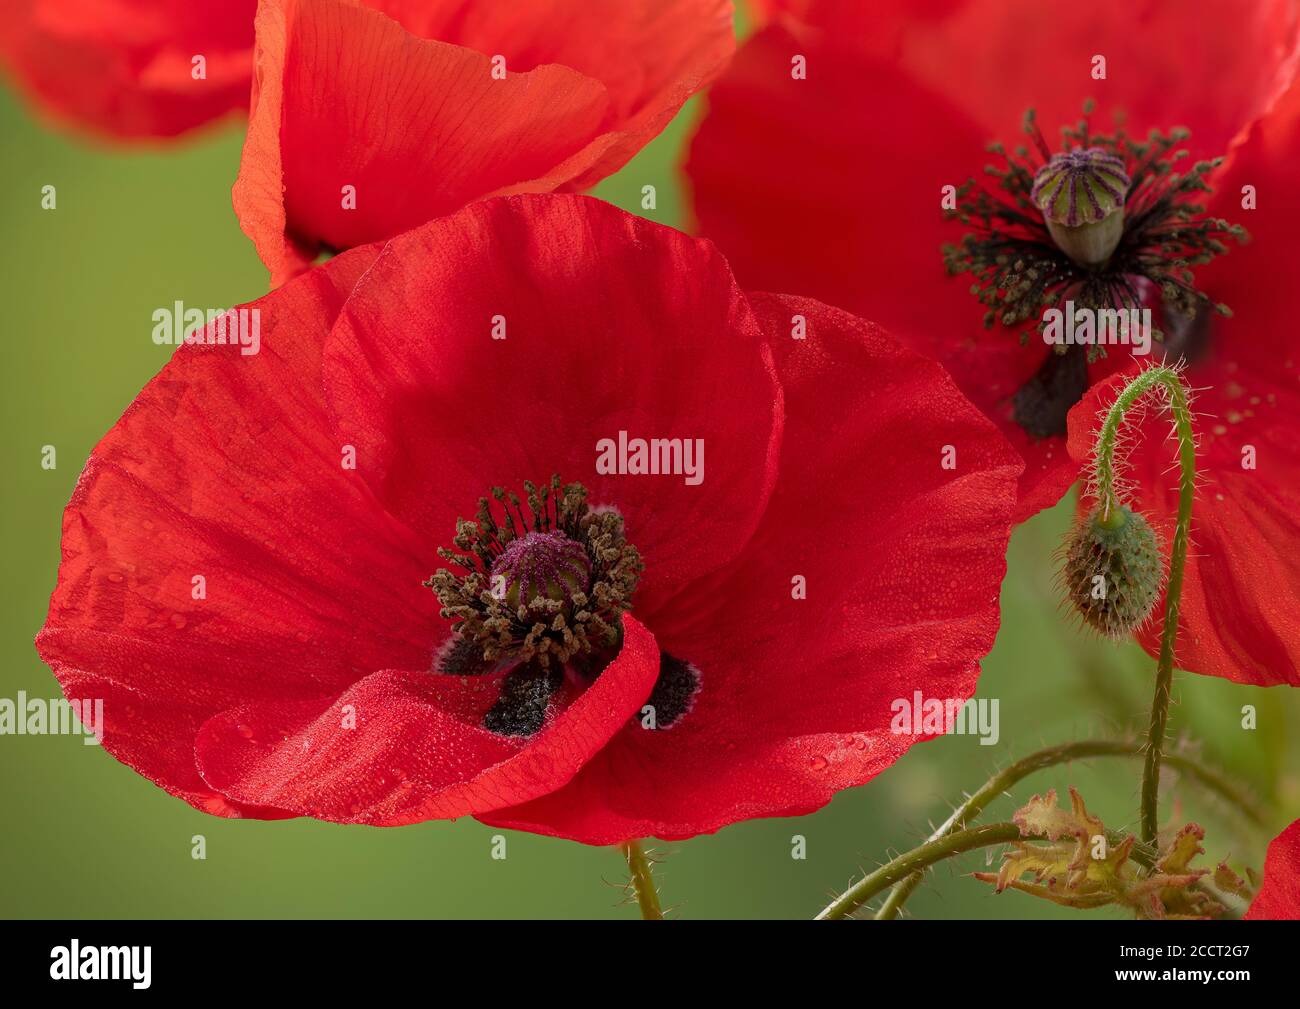 Common Poppy, Papaver rhoeas, flower in close-up. Stock Photo